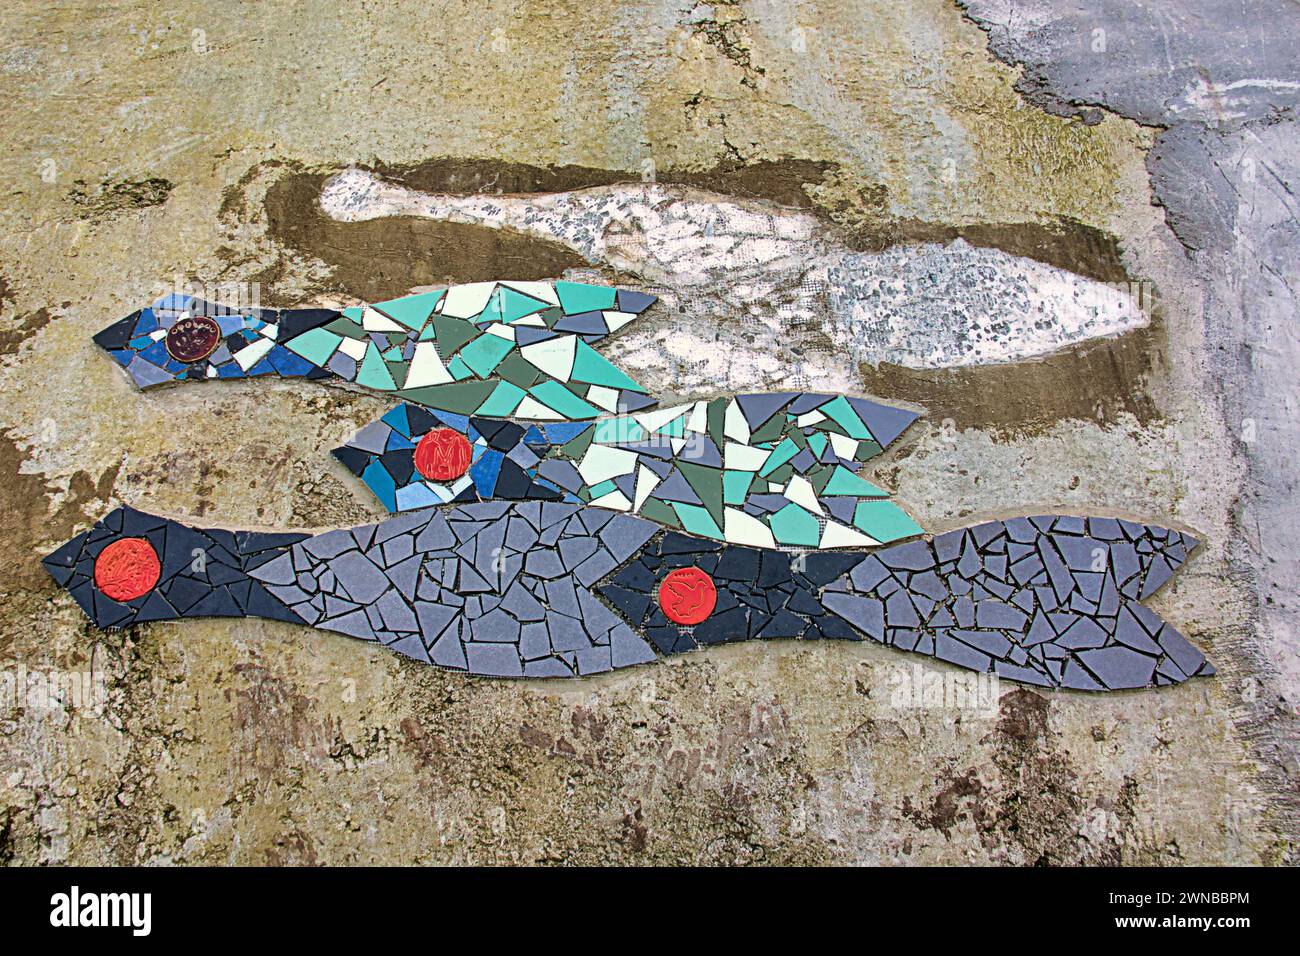 Glasgow, Scotland, UK. 1st March, 2024: Today the completion and unmasking of the 120 foot snake, Bella the Beithir,the headpiece of Scotland’s largest community mosaic art project .  “Pretty Things” Bella tribute at stockingfield bridge, Bella the snake named after the iconic author Alisdair Gray’s creation in his book that spawned the Oscar film.  Community based arts project created it under the direction of a friend of the author, Nichol Wheatley, who as atribute named it after Bella Baxter. Credit Gerard Ferry/Alamy Live News Stock Photo